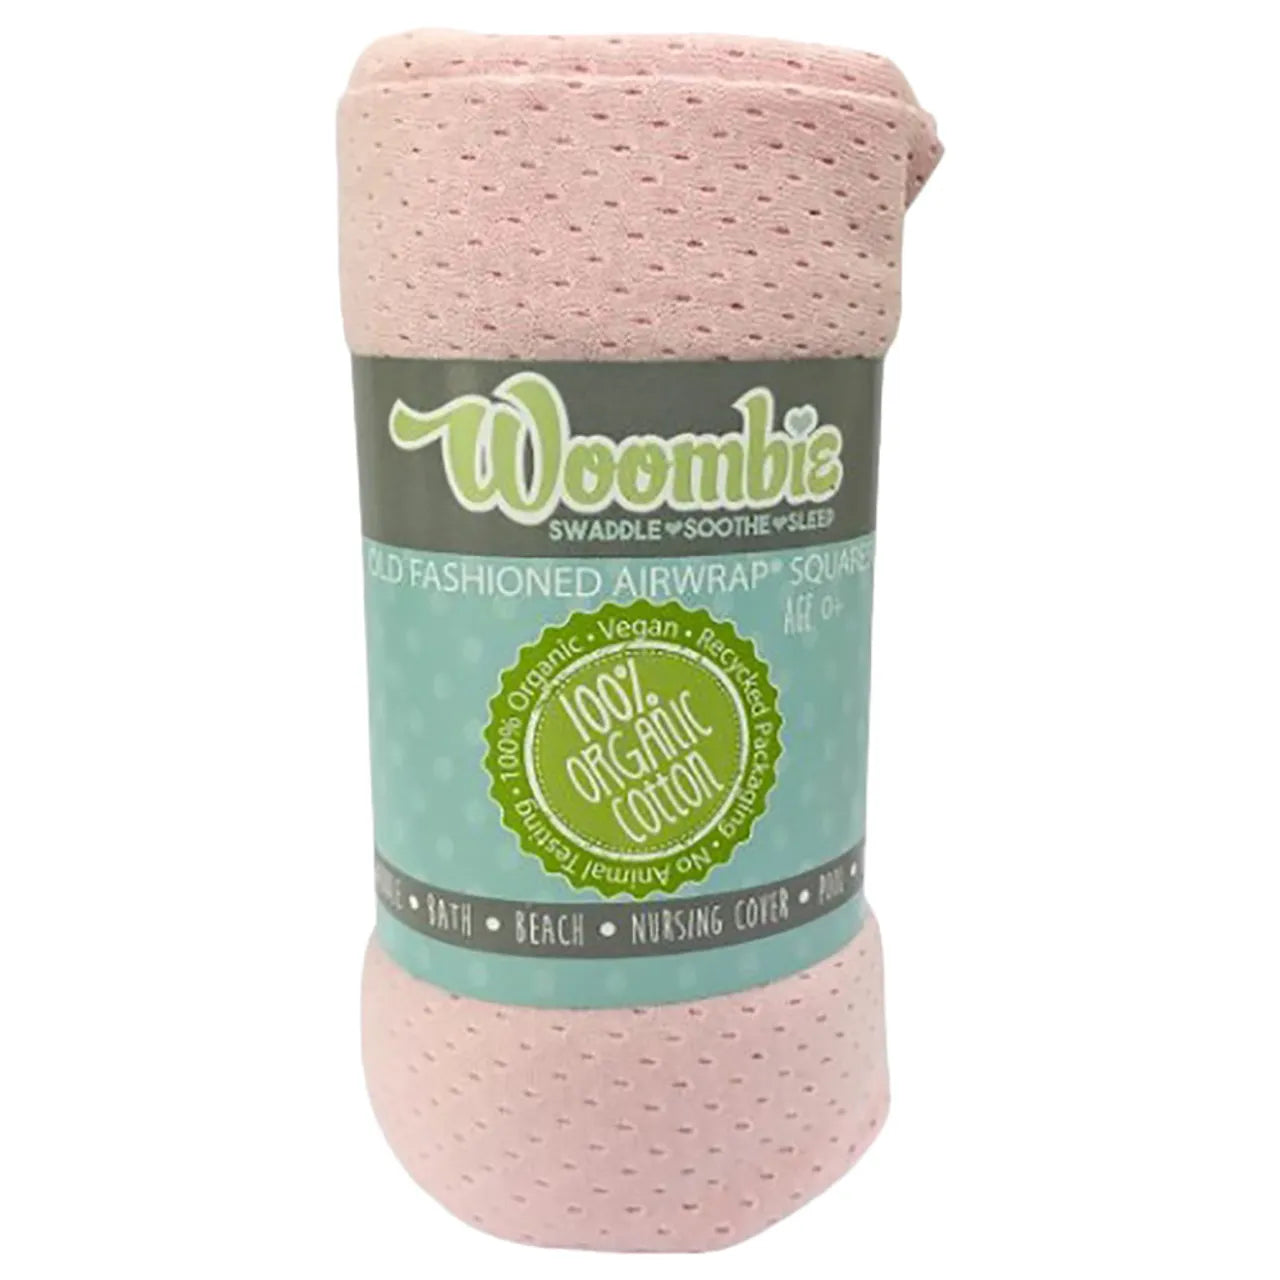 Woombie Old Fashioned Airwrap - Pretty Pink - Laadlee